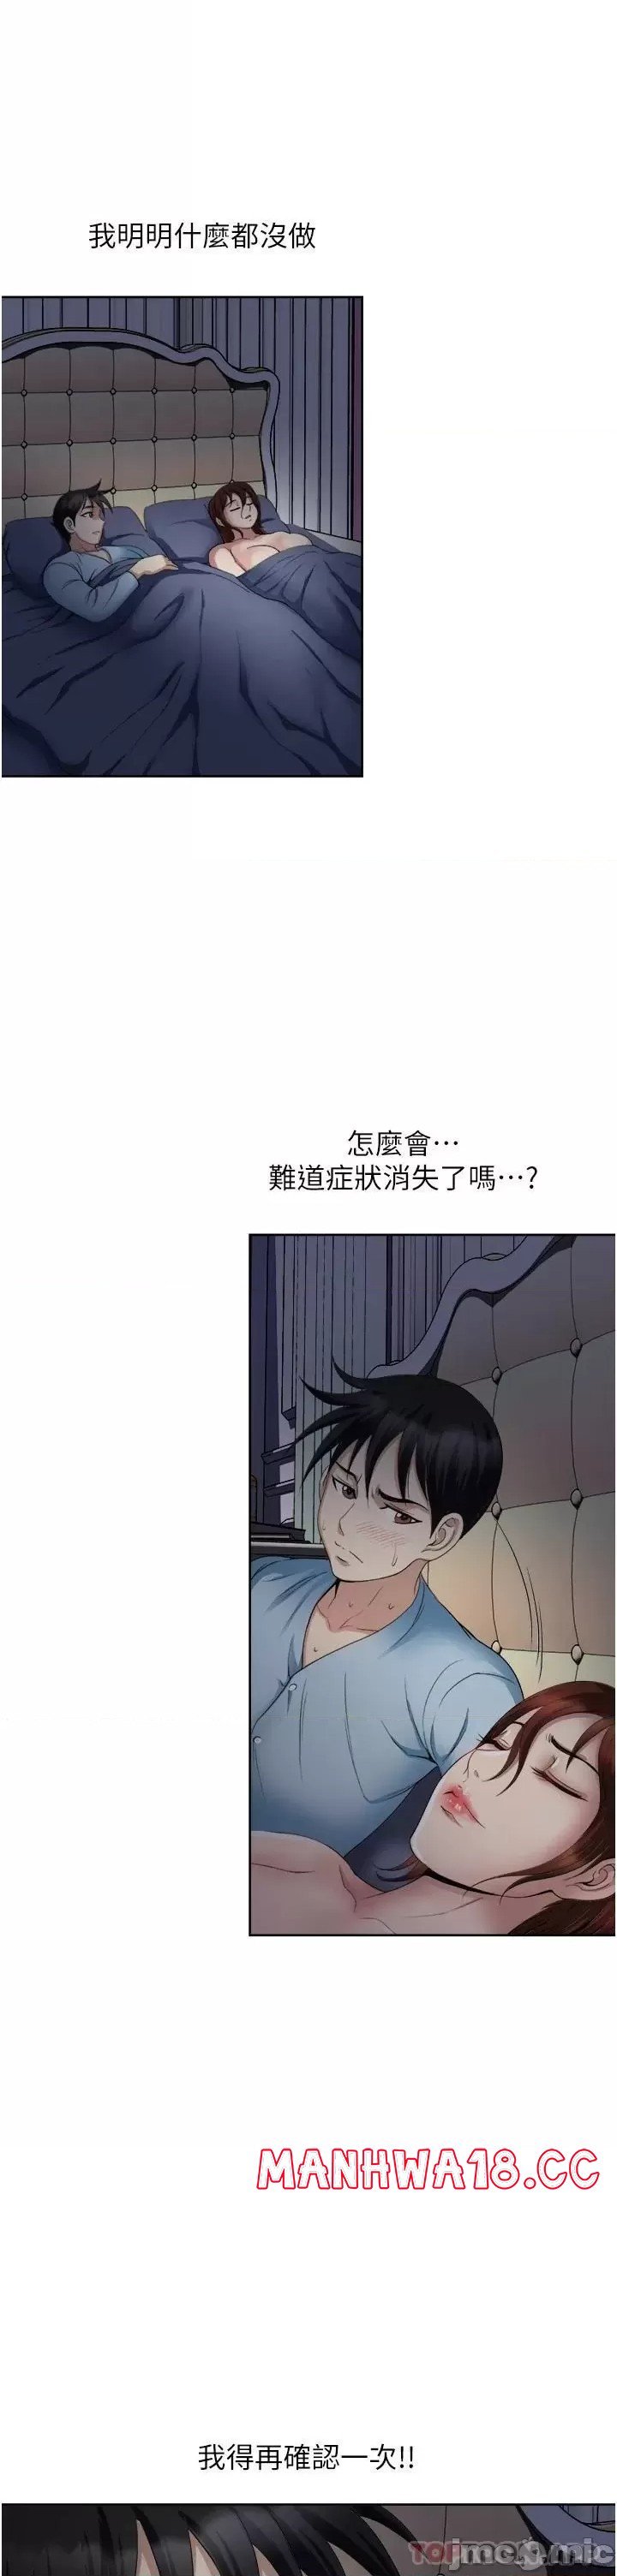 just-once-raw-chap-26-18